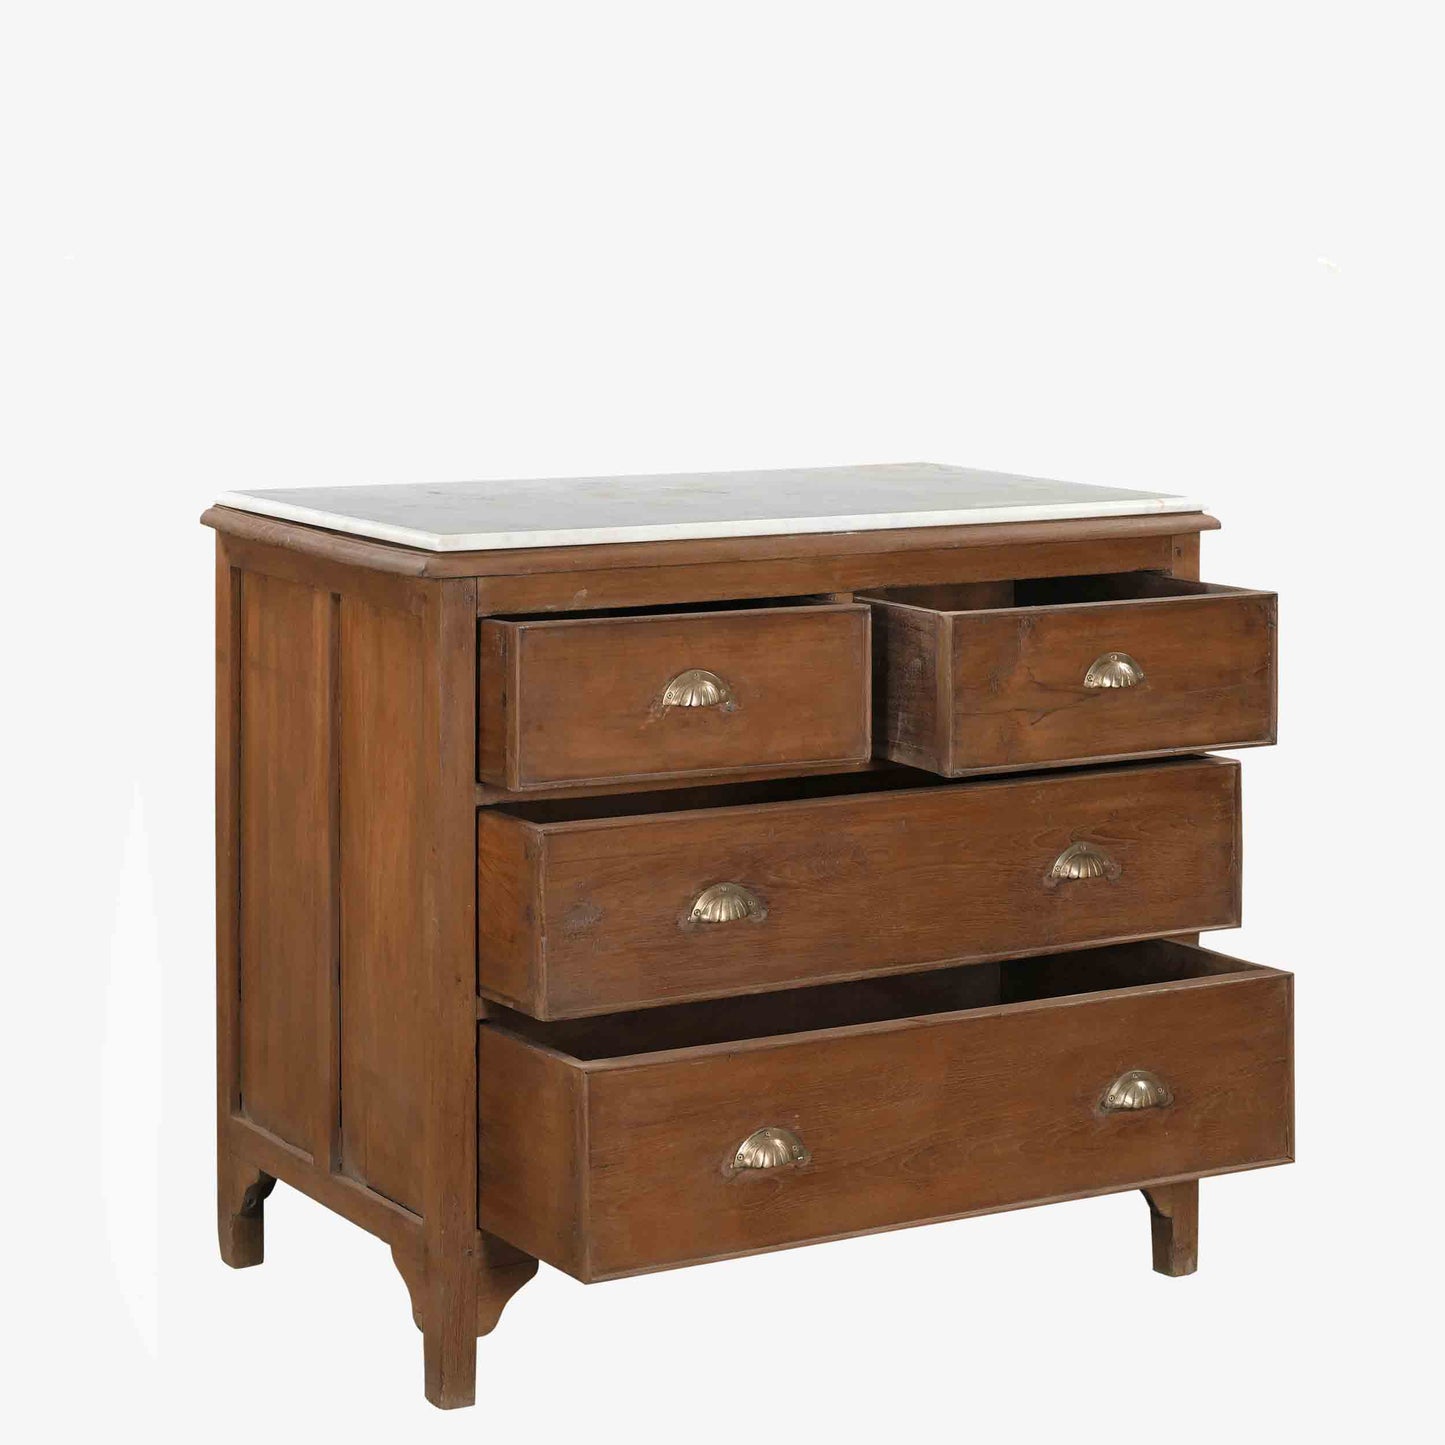 The Farna Antique Chest of Drawers with Marble